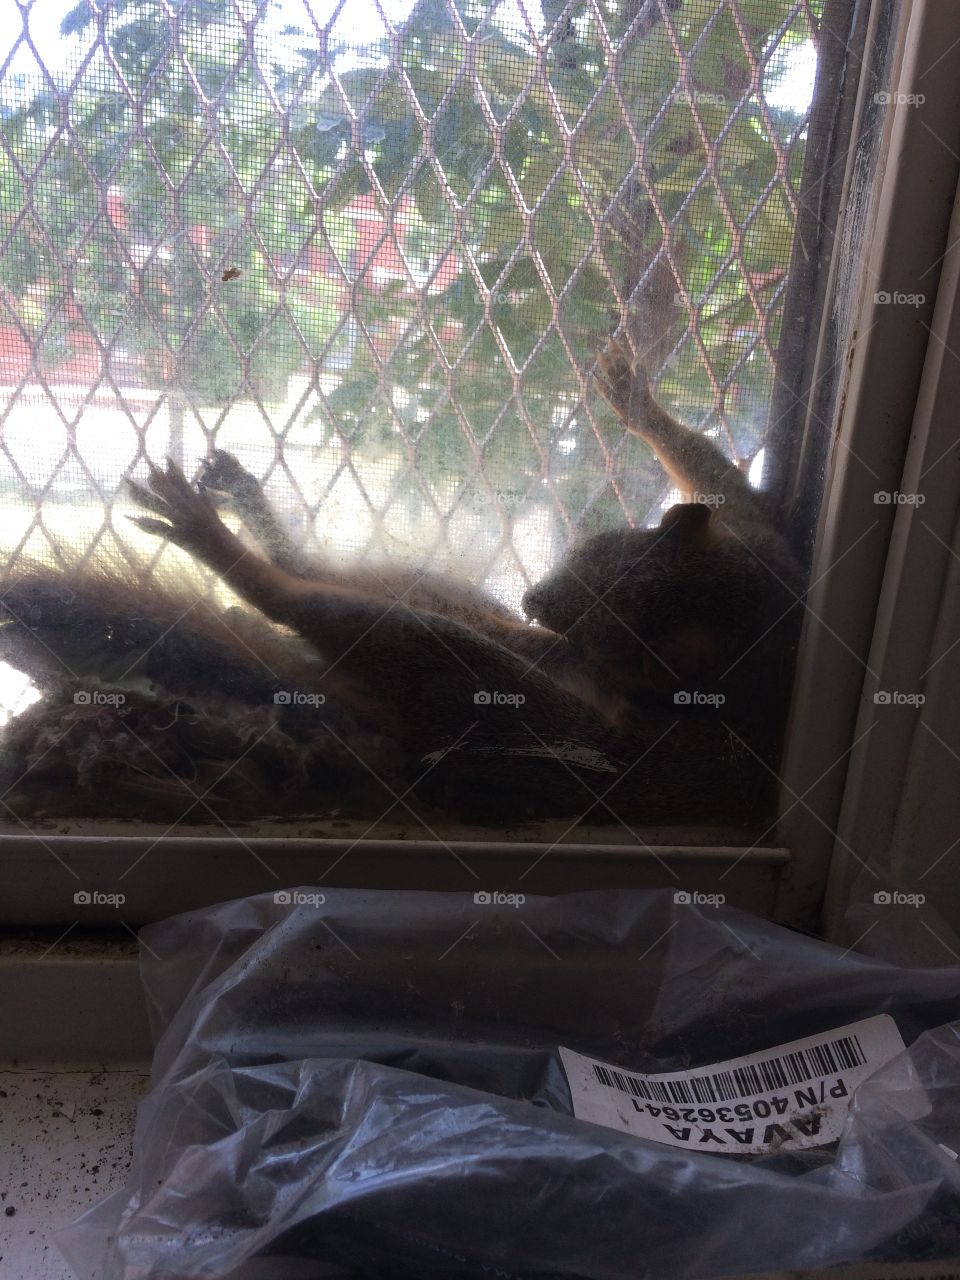 Another squirrel in the window trying to stay cool. 